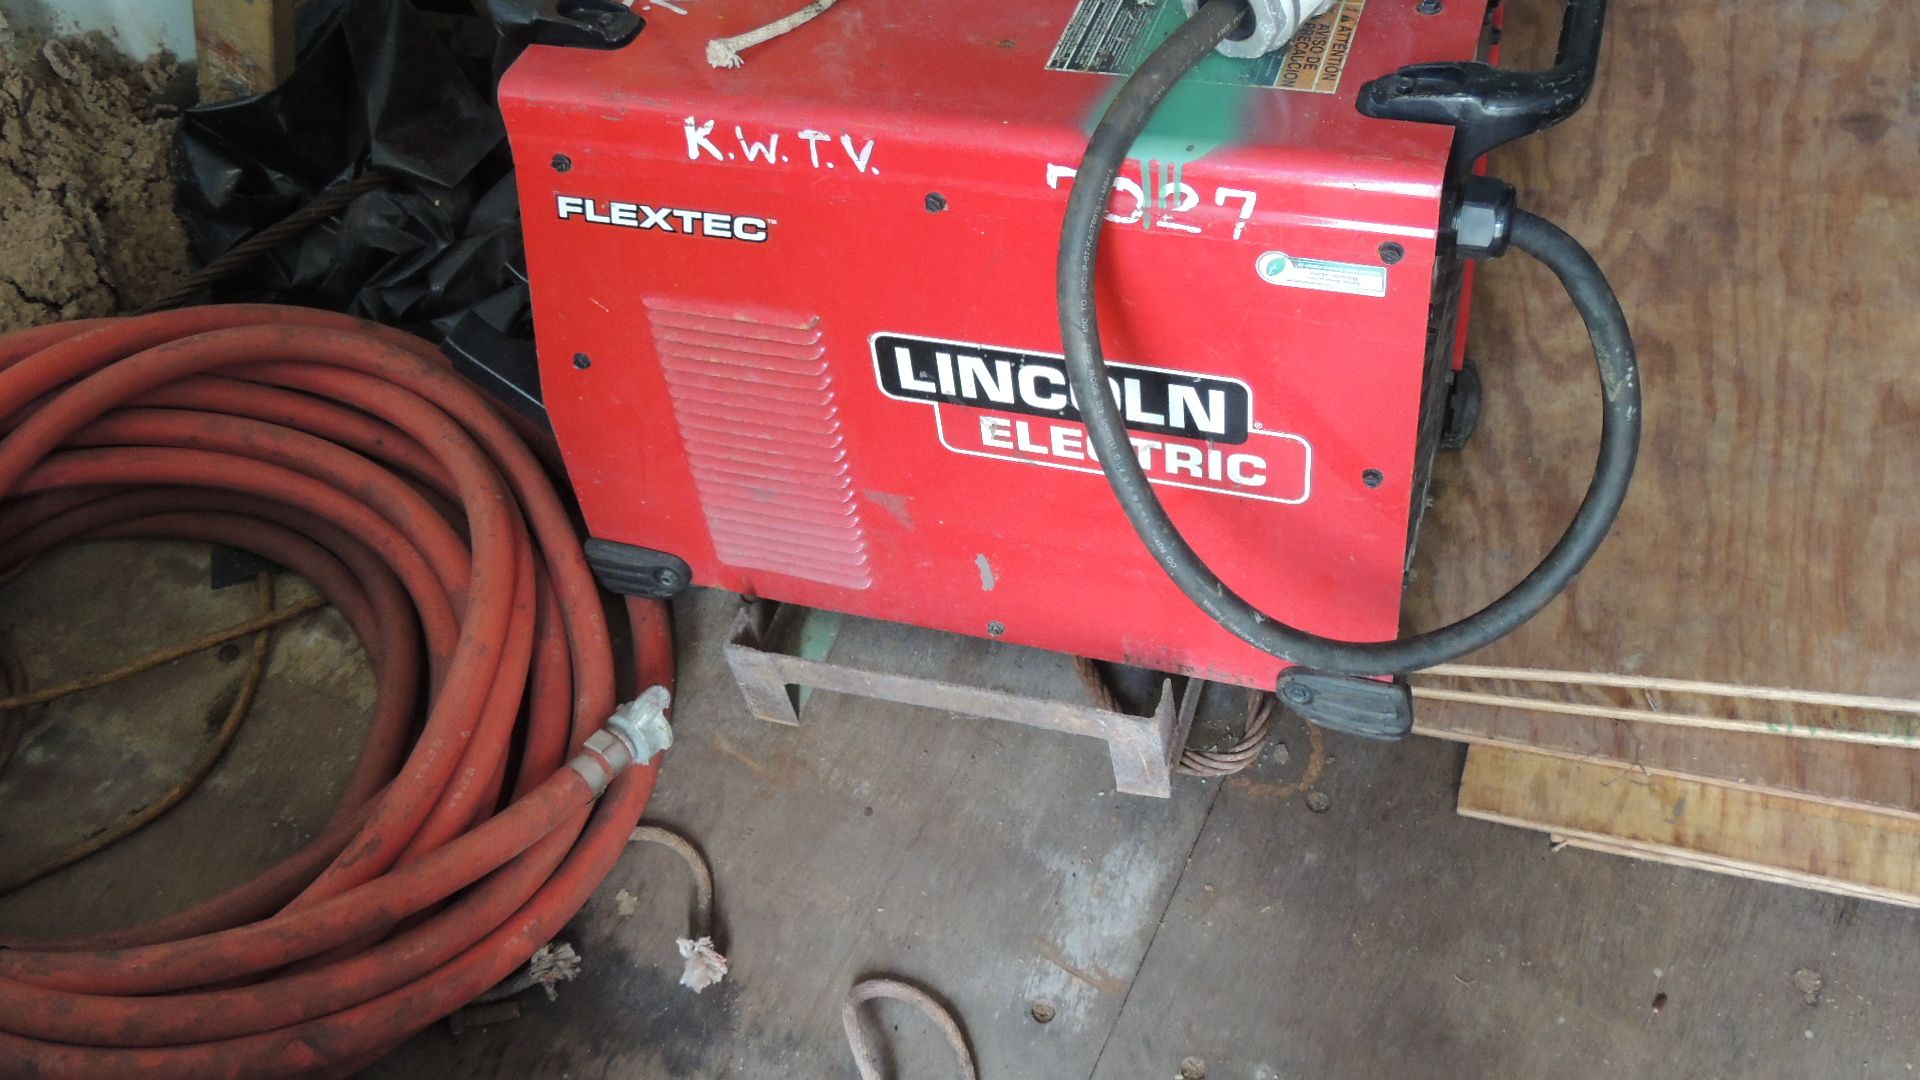 Container / Tools. Conex 20' container and contents, Lincoln welder Flextec 450, 1 ton hoist, - Image 8 of 13